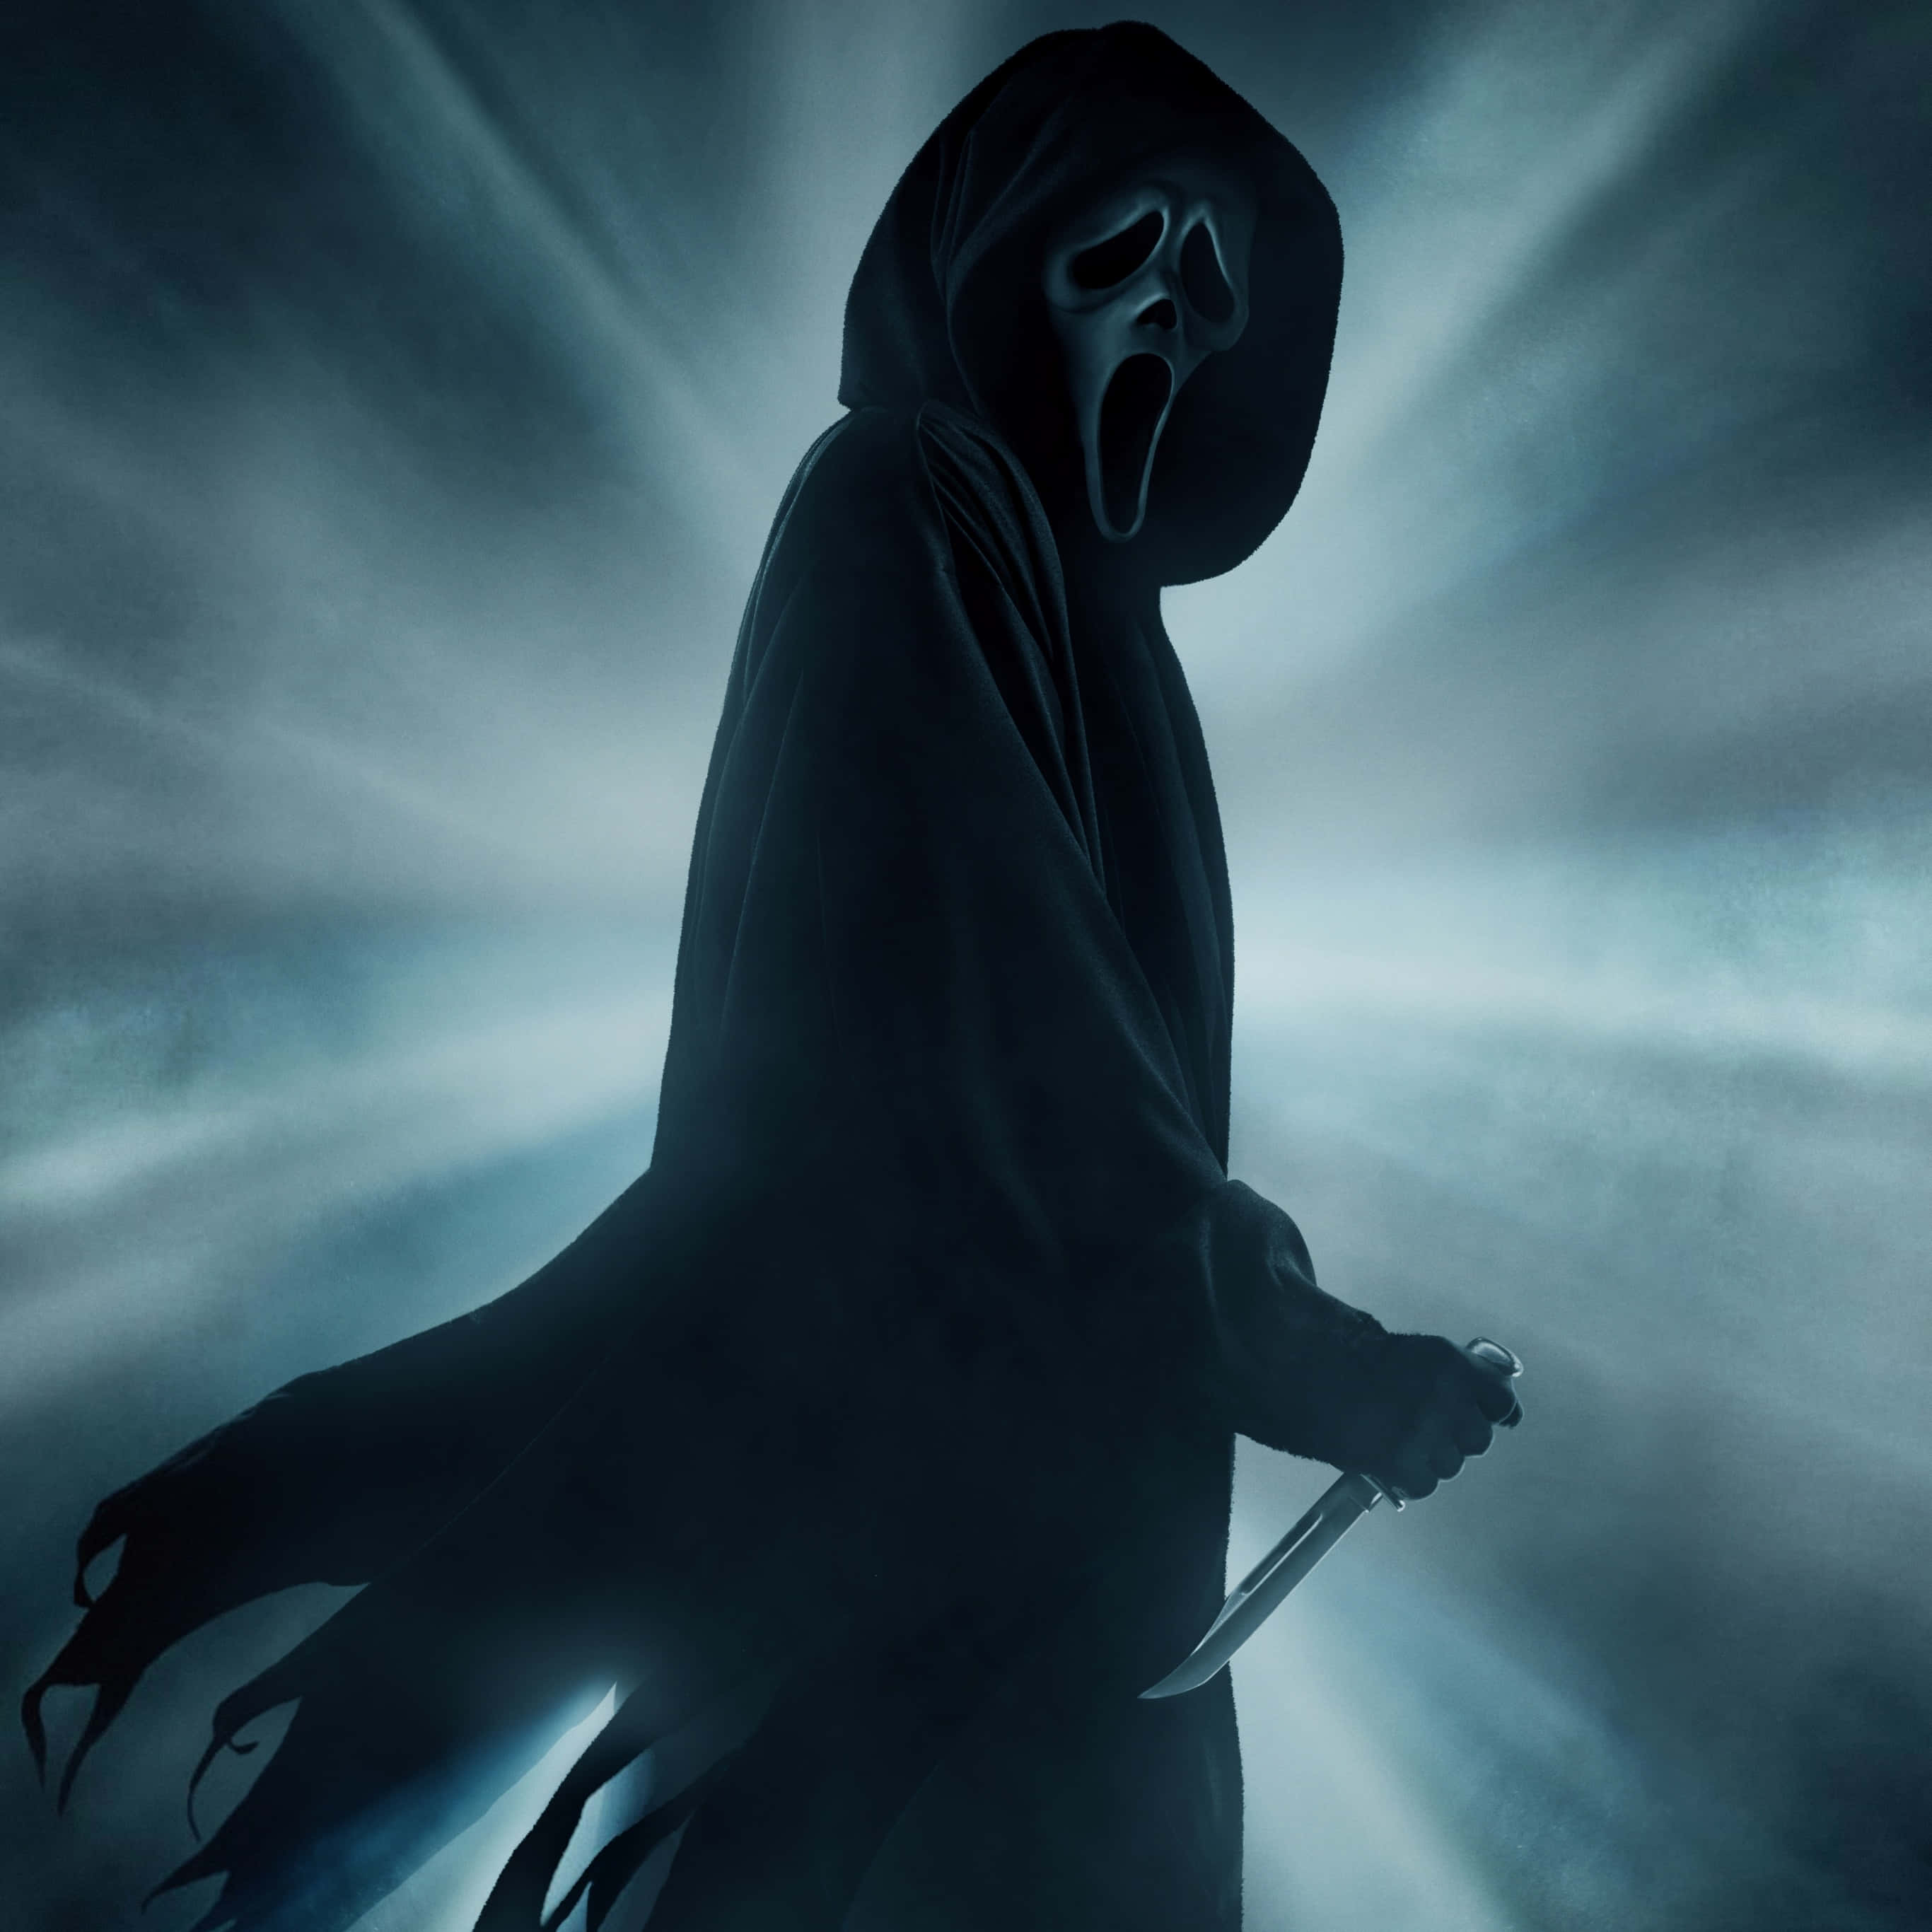 Scream Movie Poster With A Man In A Hooded Robe Wallpaper